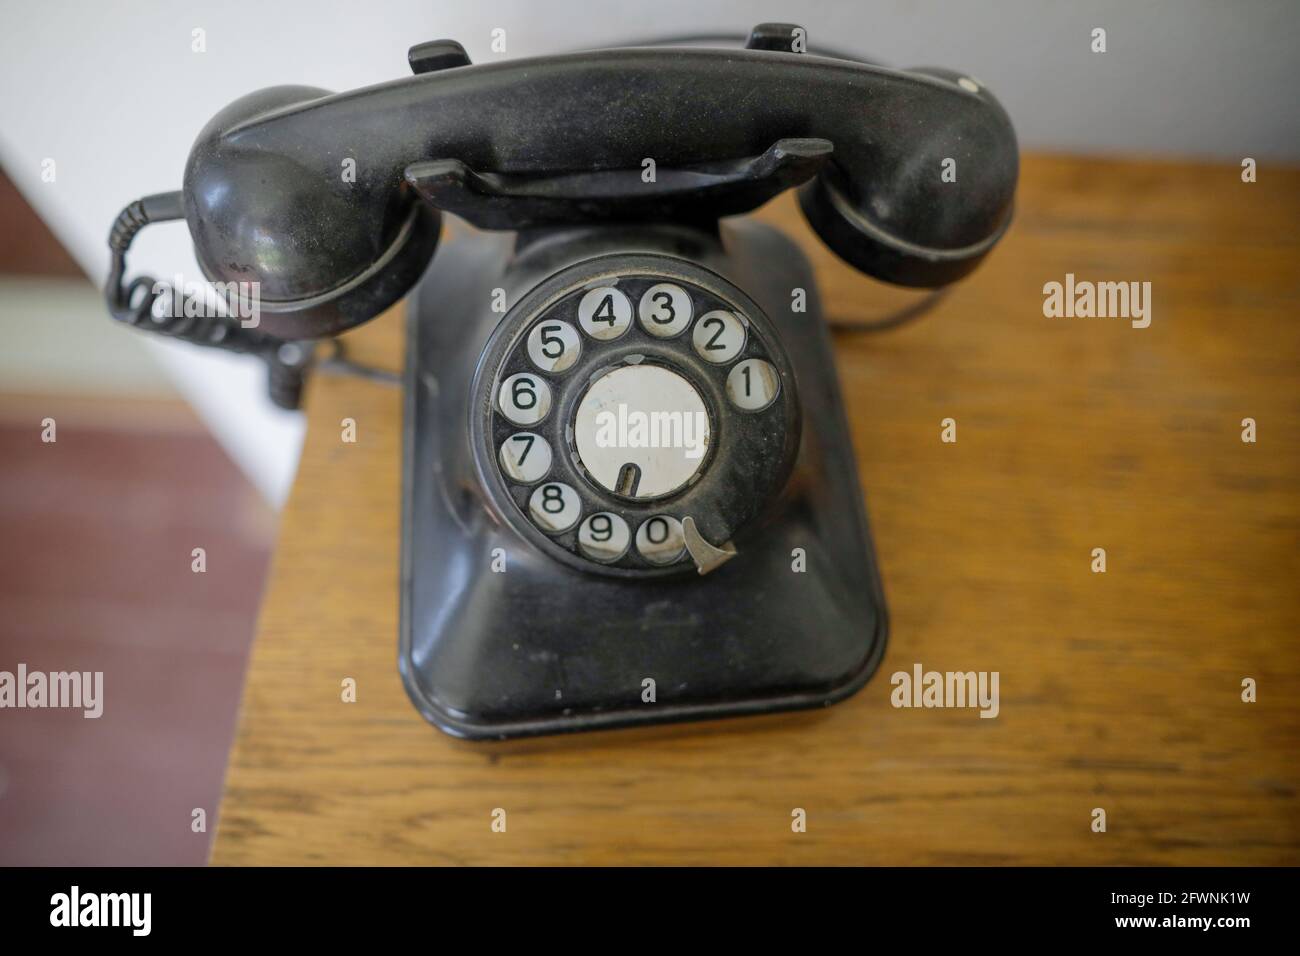 Shallow depth of field (selective focus) details with an old and dusty dial rotary phone from the communist Romania era. Stock Photo